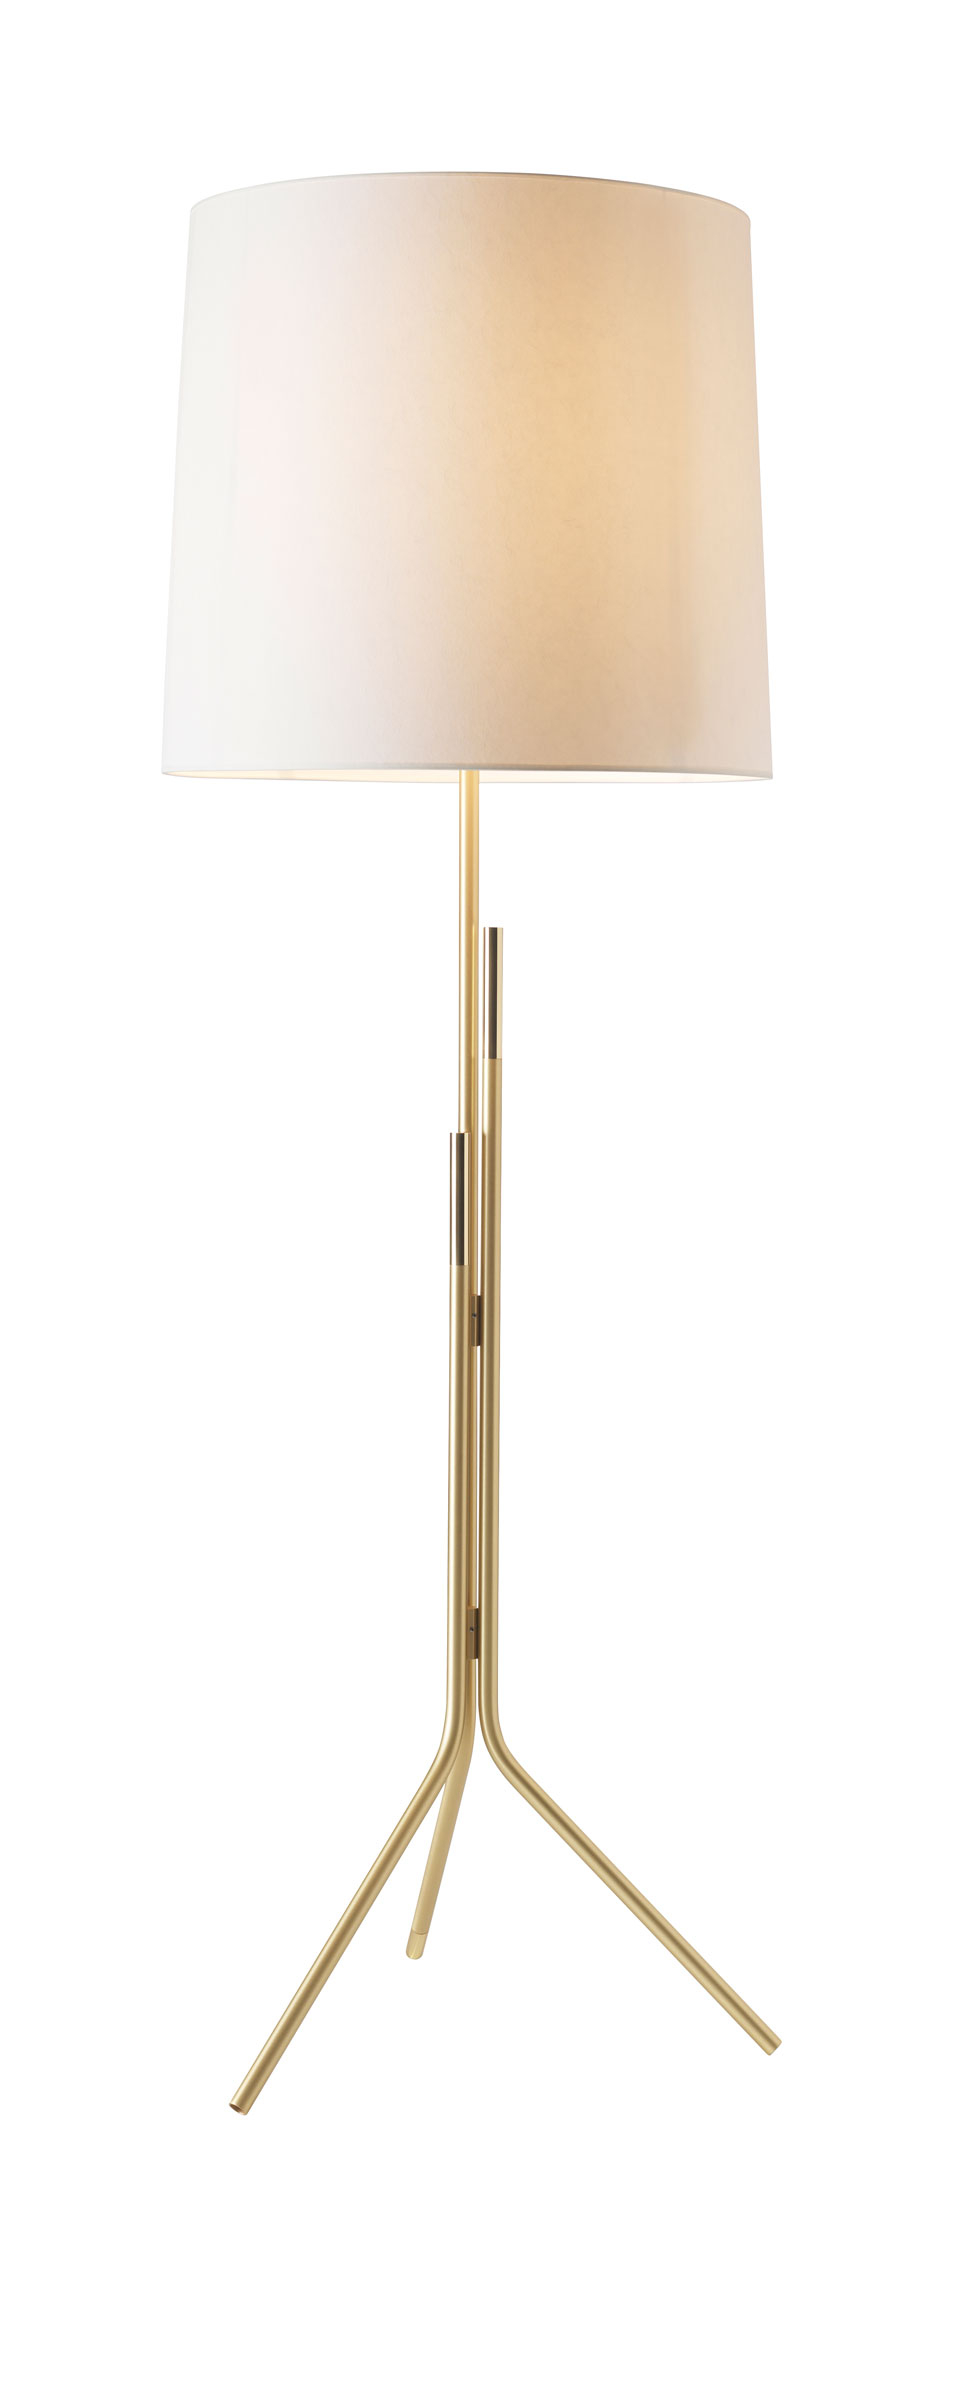 Contemporary Floor Lamp Brass Stand Cylindrical Shade In White Drop Paper Design Herv Langlais with dimensions 960 X 2399